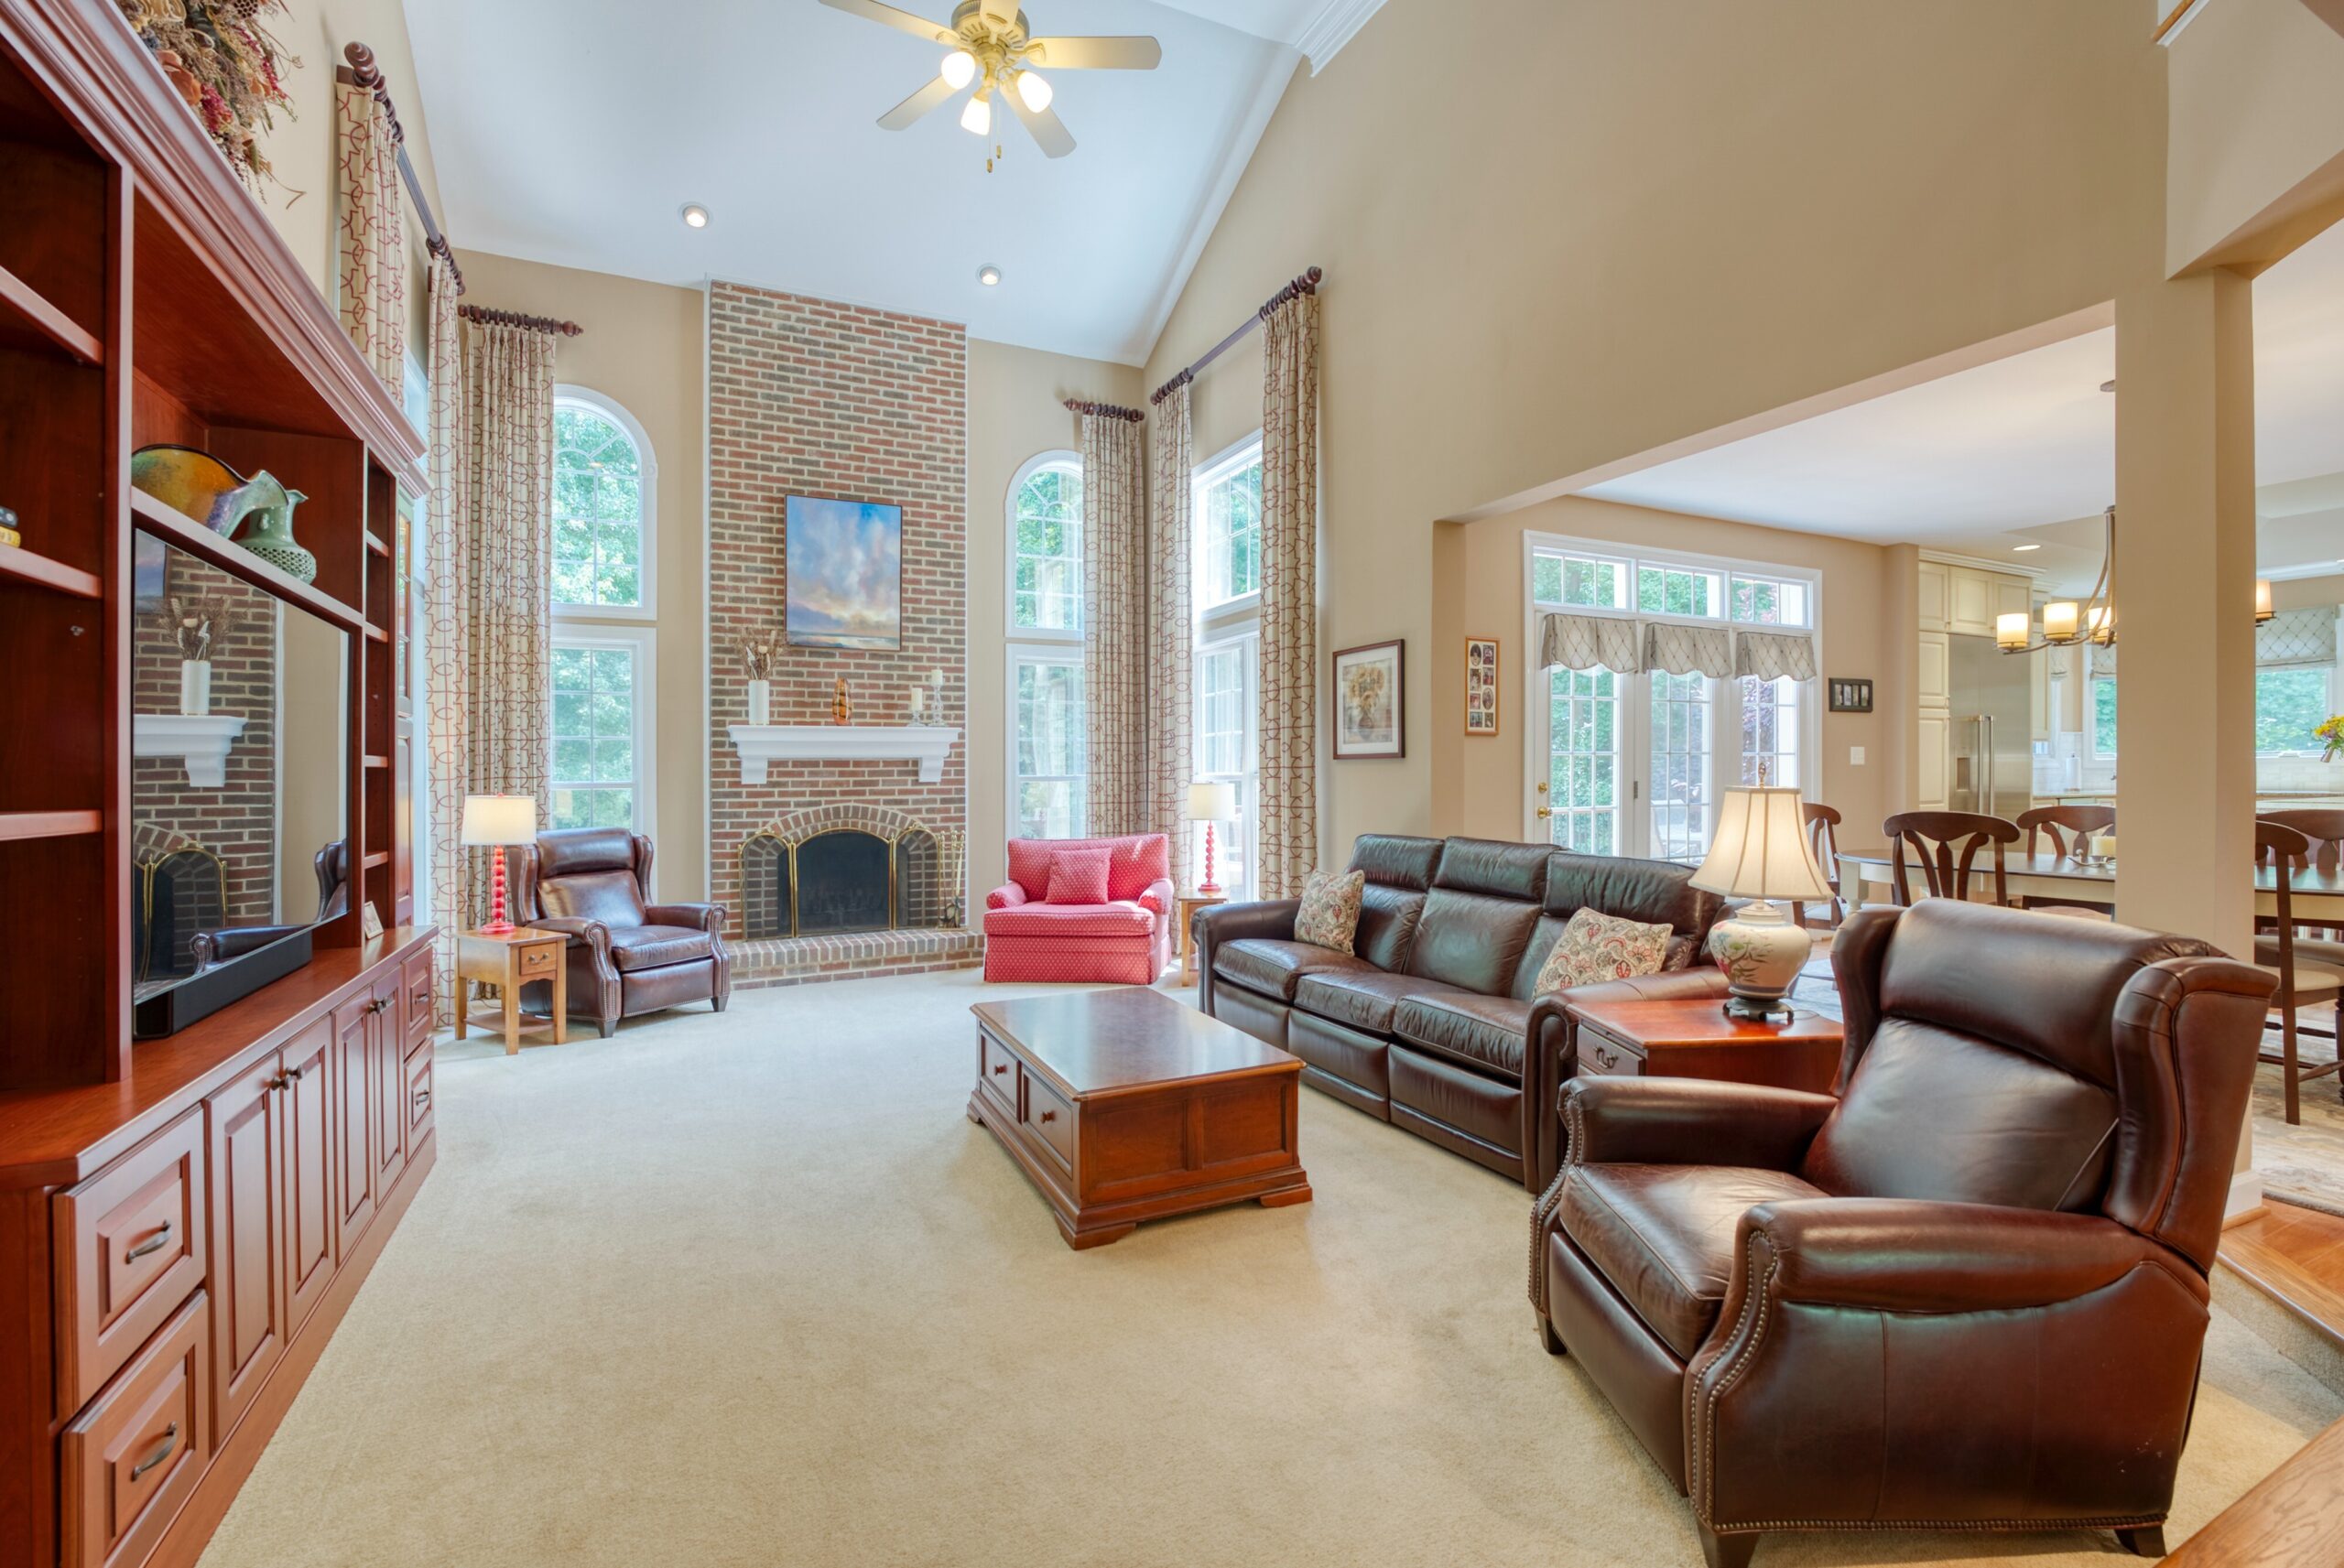 Living room of stately home in Fairfax, VA - showing2-story brick fireplace with floor-to-ceiling windows on either side and open floor plan glimpsing the kitchen. 10703 Ox Croft Ct, Fairfax Station, VA